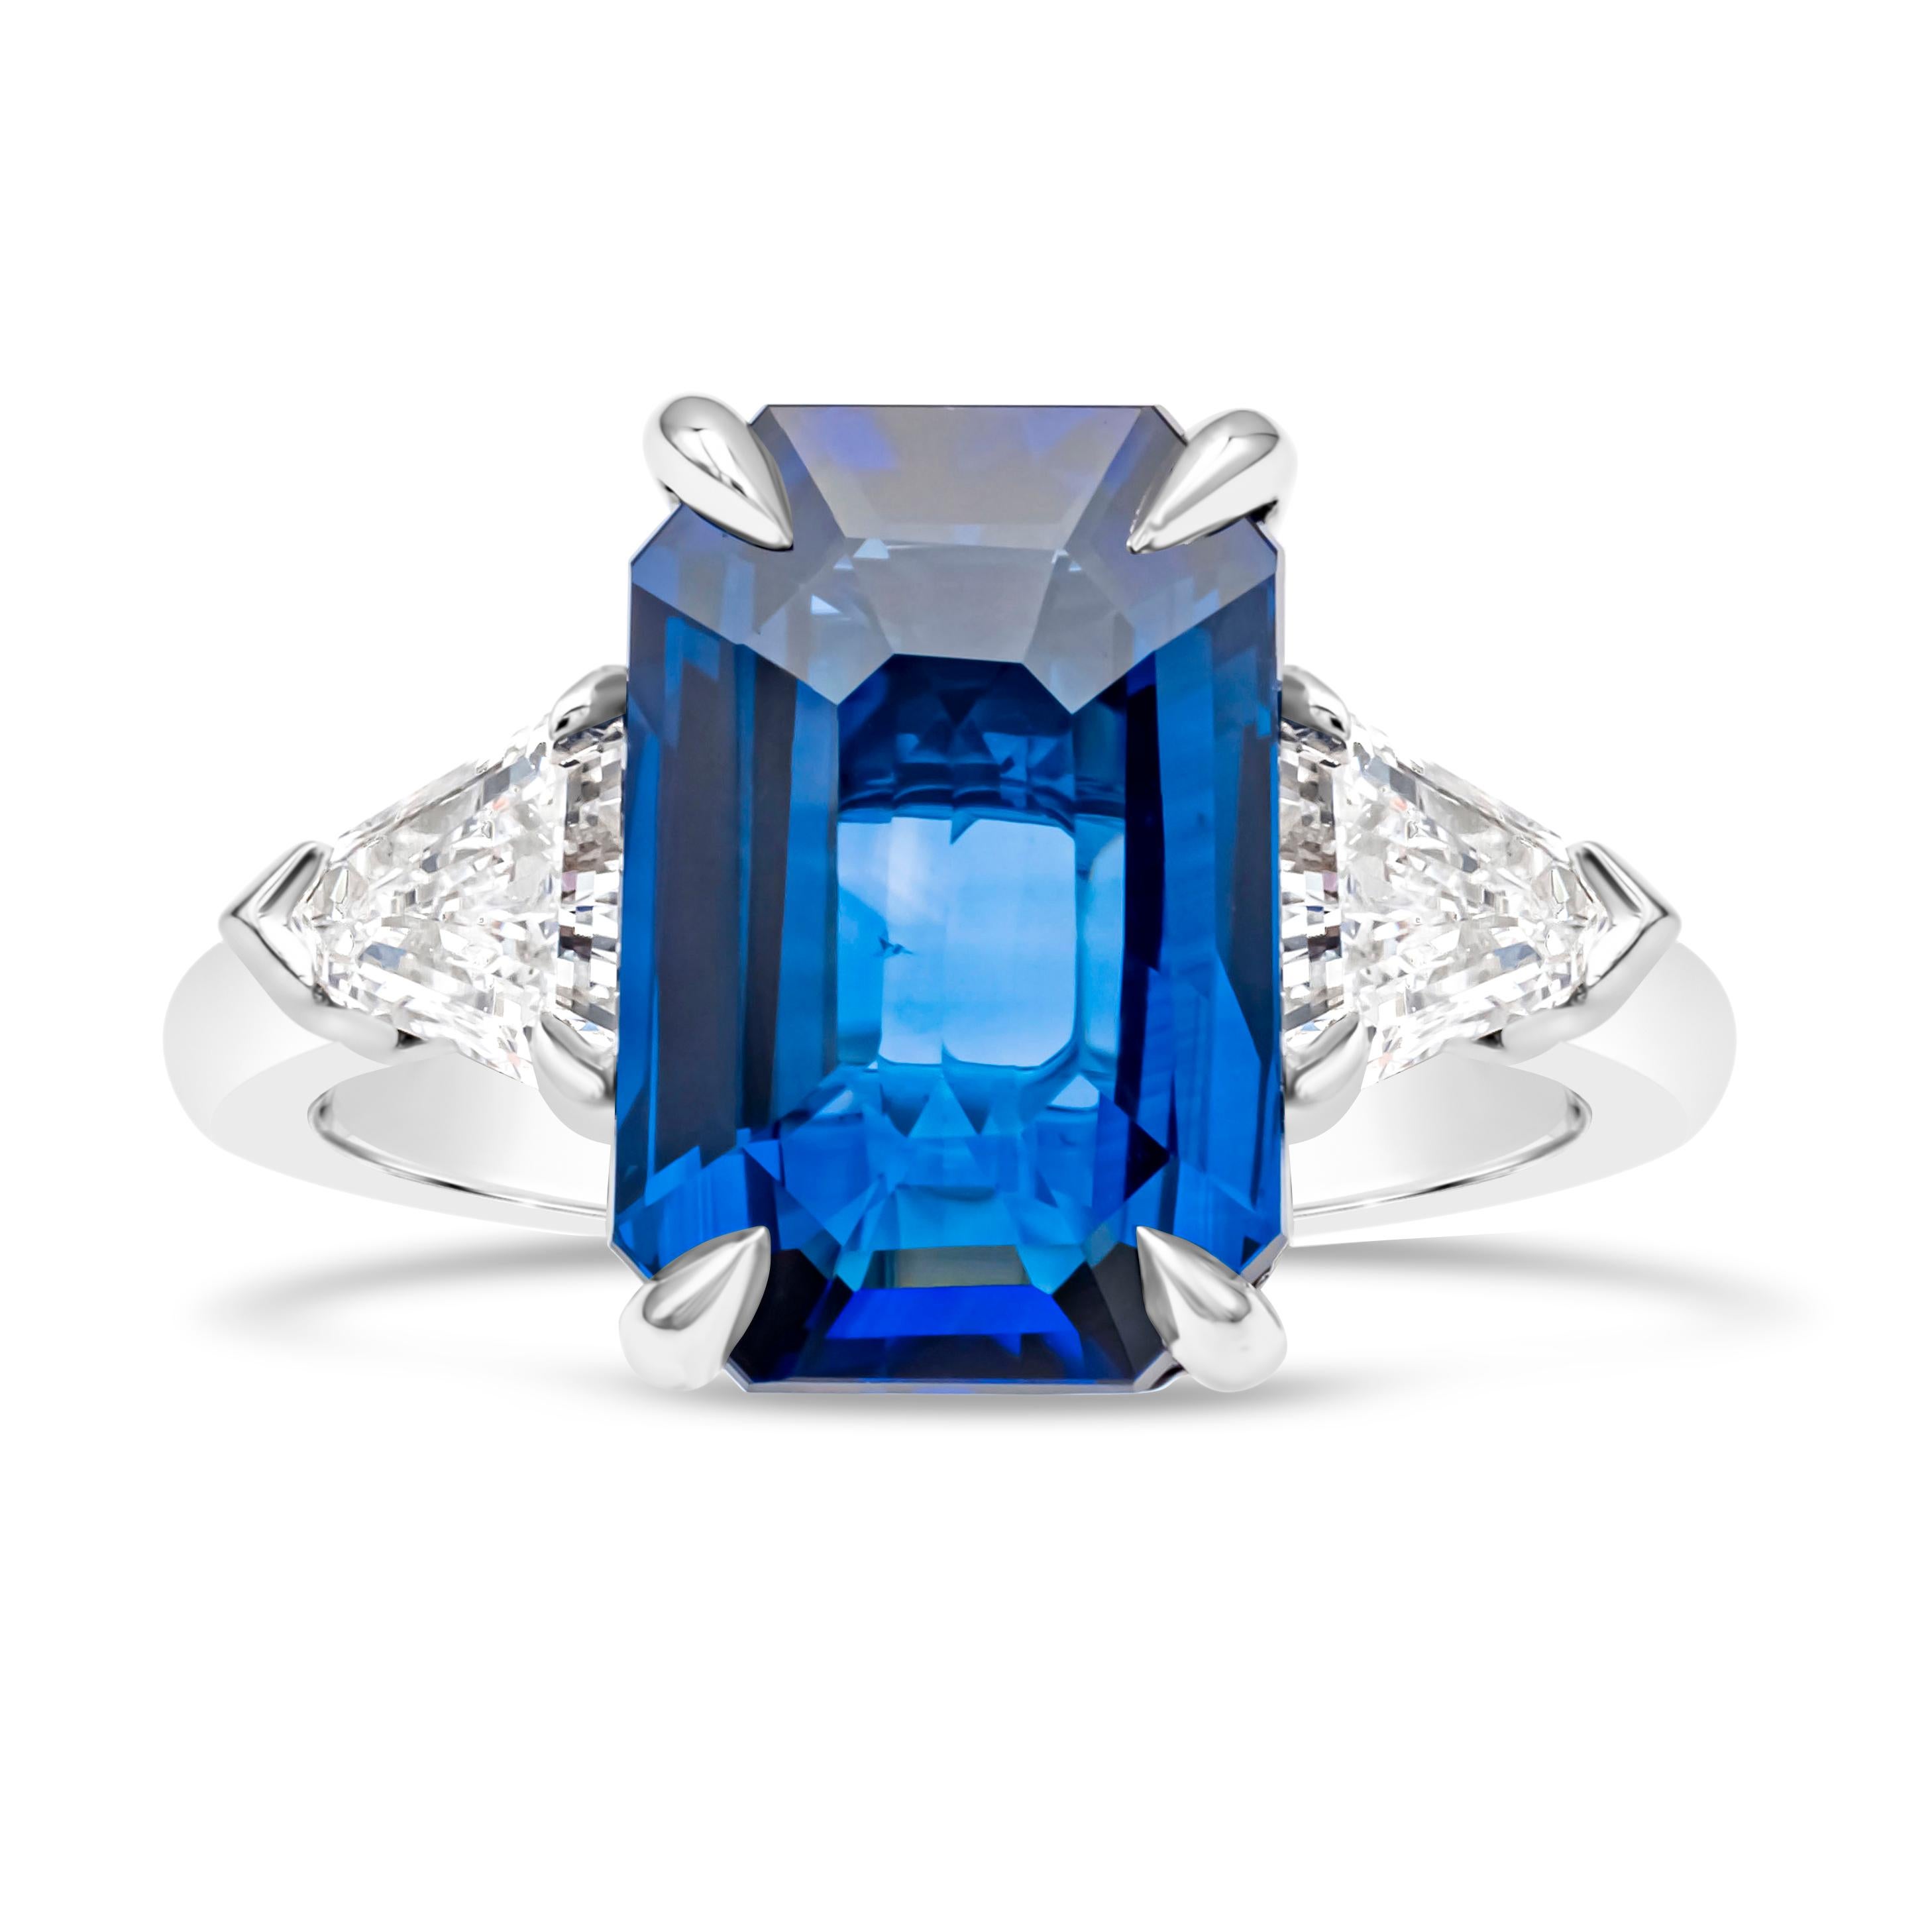 This wonderful and beautiful three stone engagement ring showcasing a GRS certified 5.04 carats emerald cut brilliant blue sapphire in the center, flanked by two shield shape diamonds on each side weighing 0.98 carats total, F Color and VS in